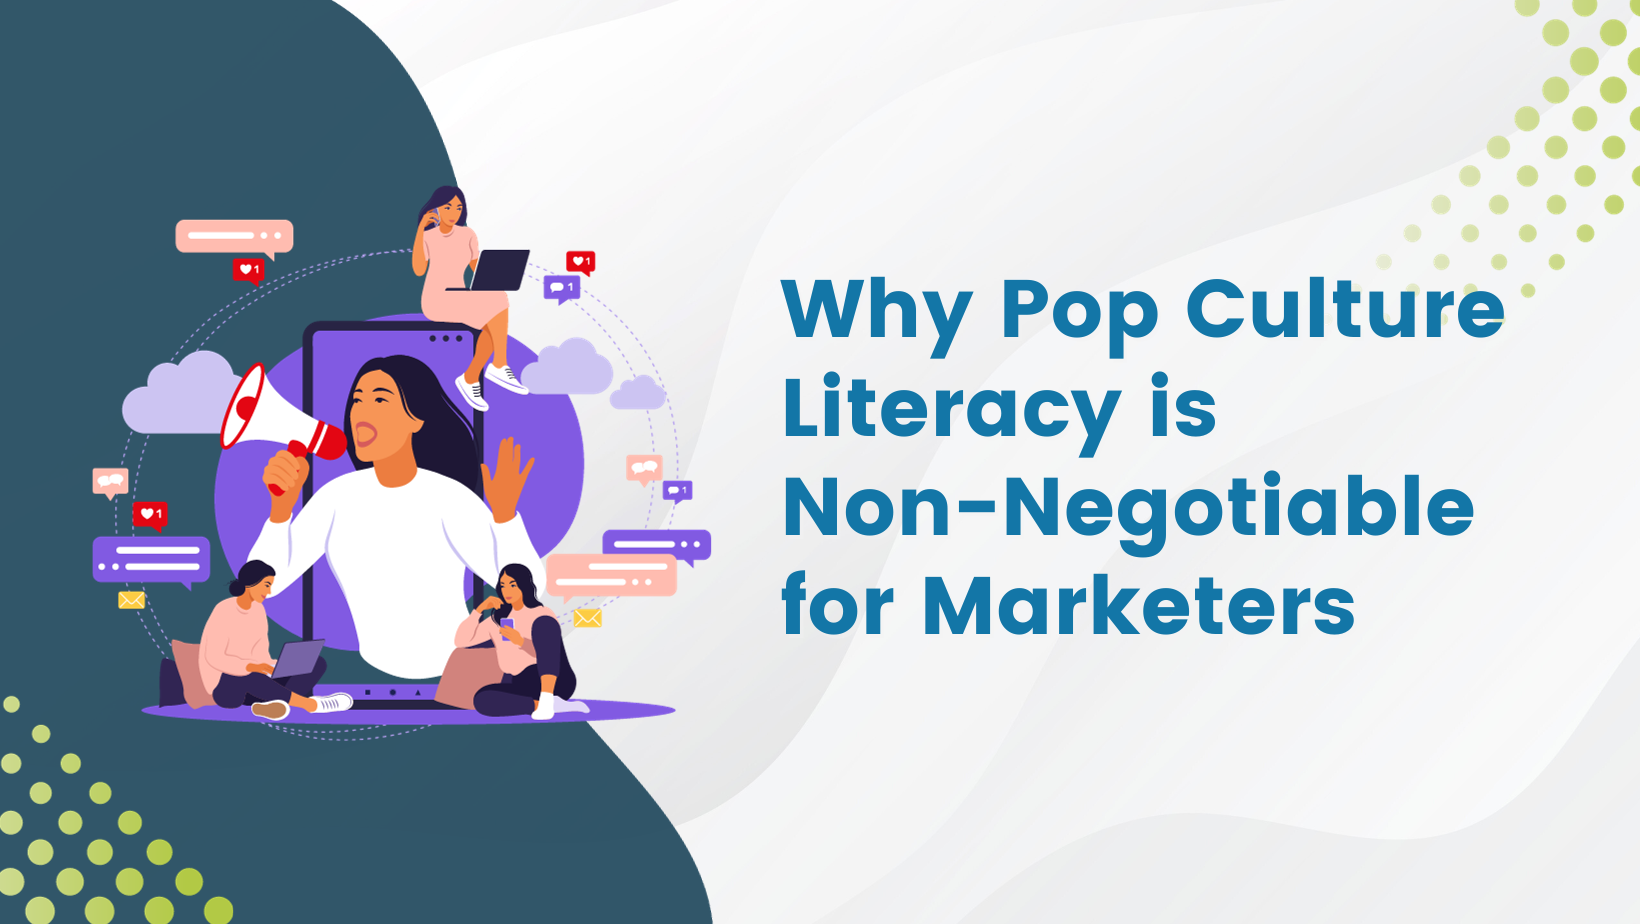 Graphic: Why Pop Culture Literacy is Non-Negotiable for Marketers